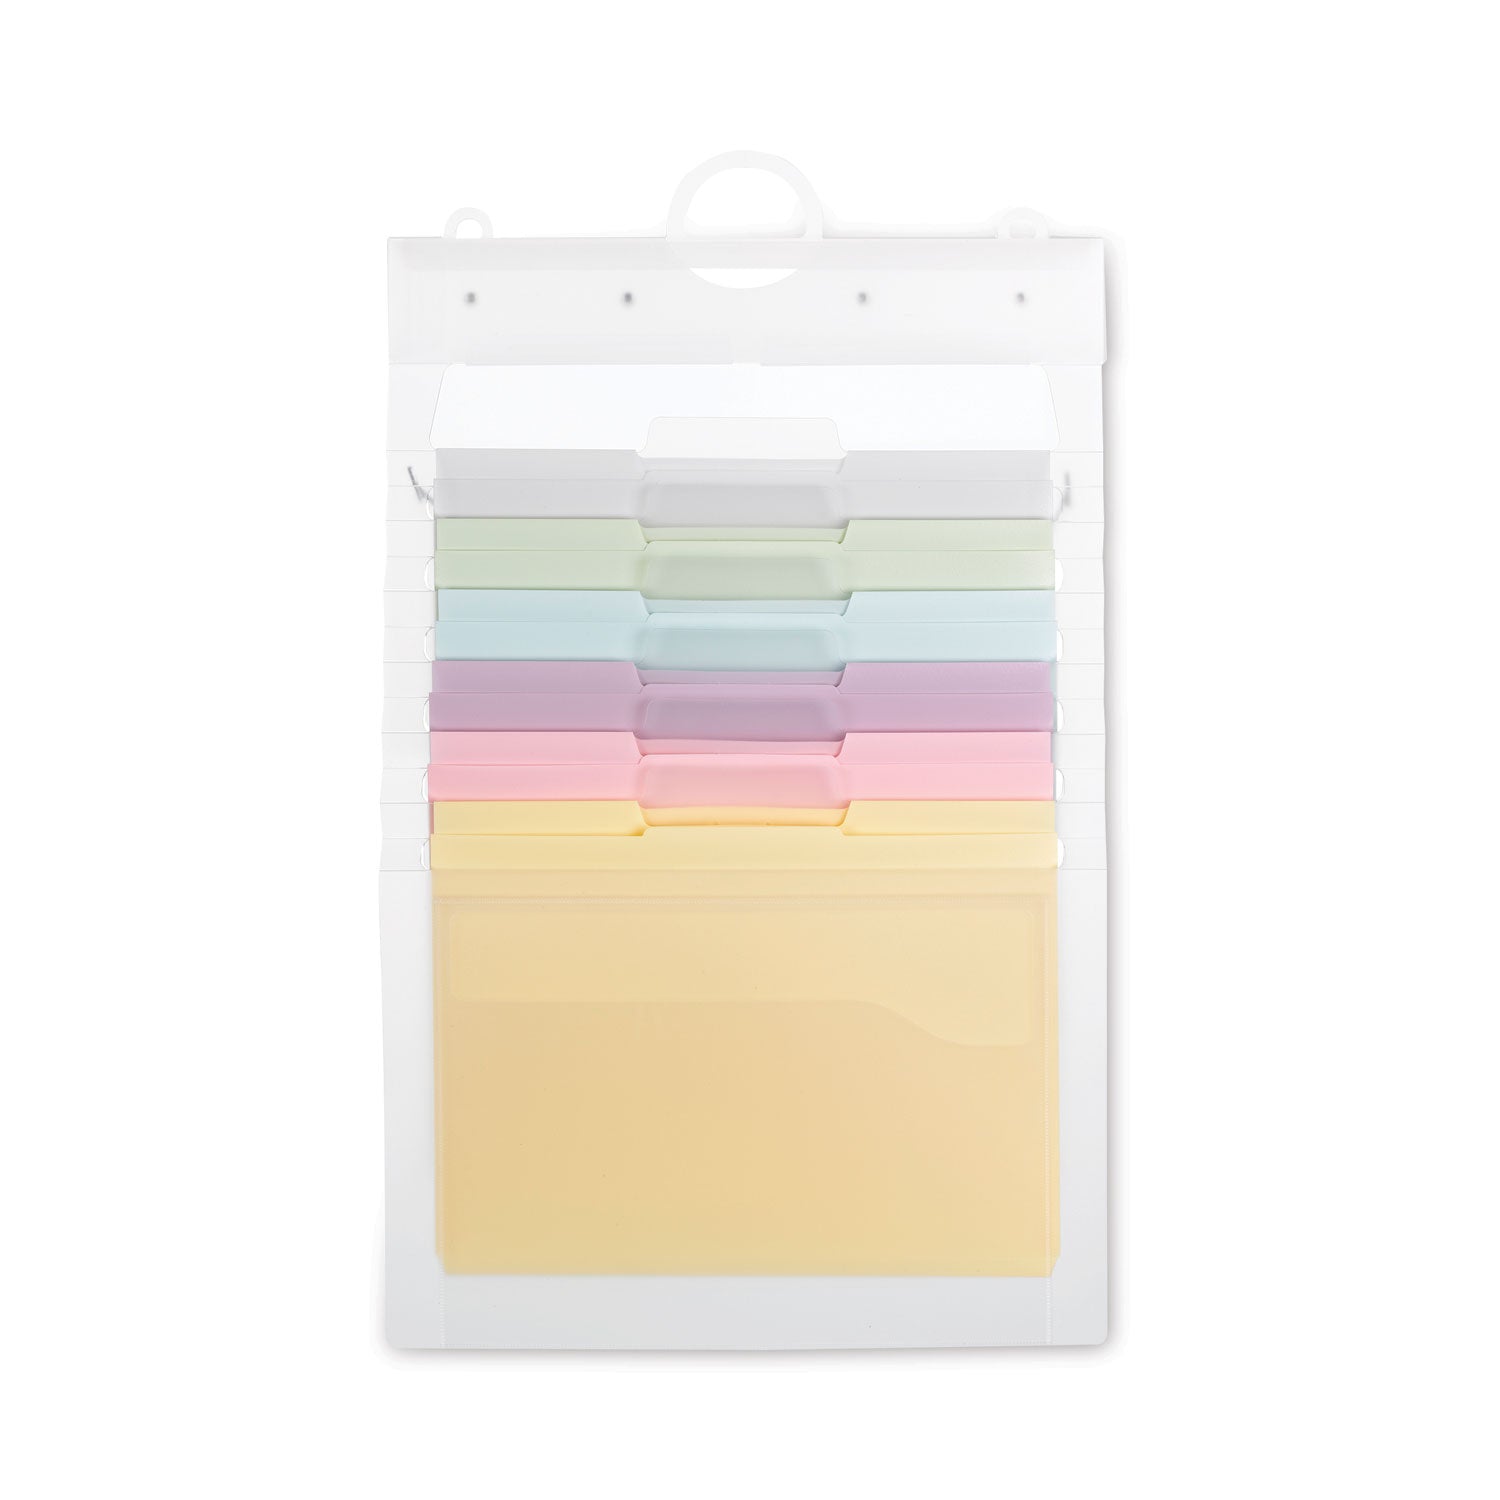 cascading-wall-organizer-6-sections-letter-size-1425-x-2425-blue-clear-gray-green-orange-pink-purple_smd92064 - 1